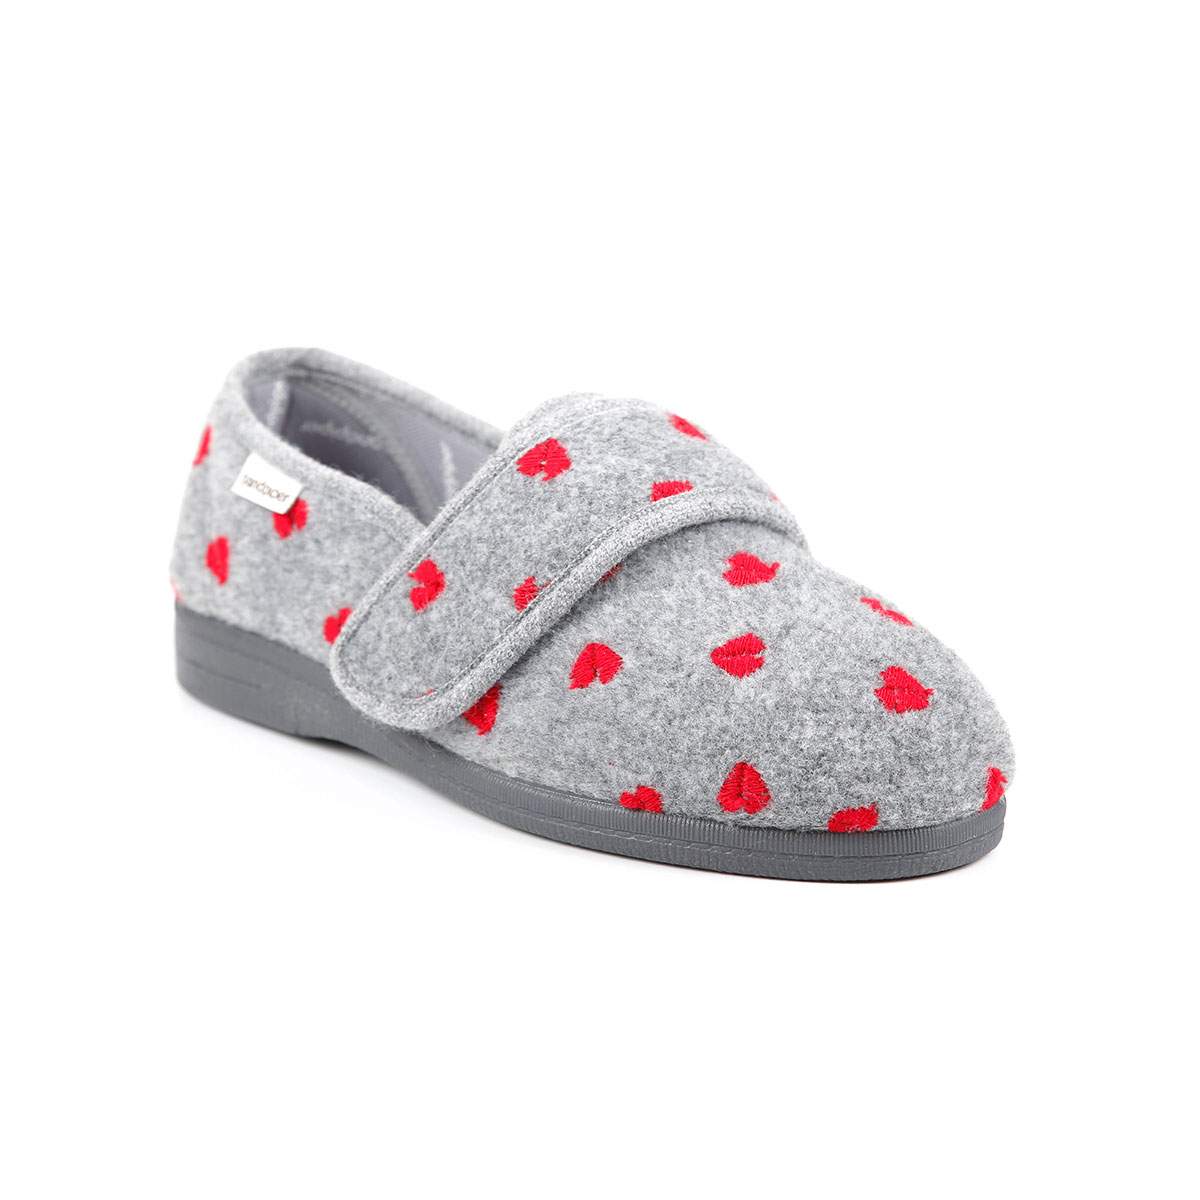 Grey with red hearts pattern Sophie slipper